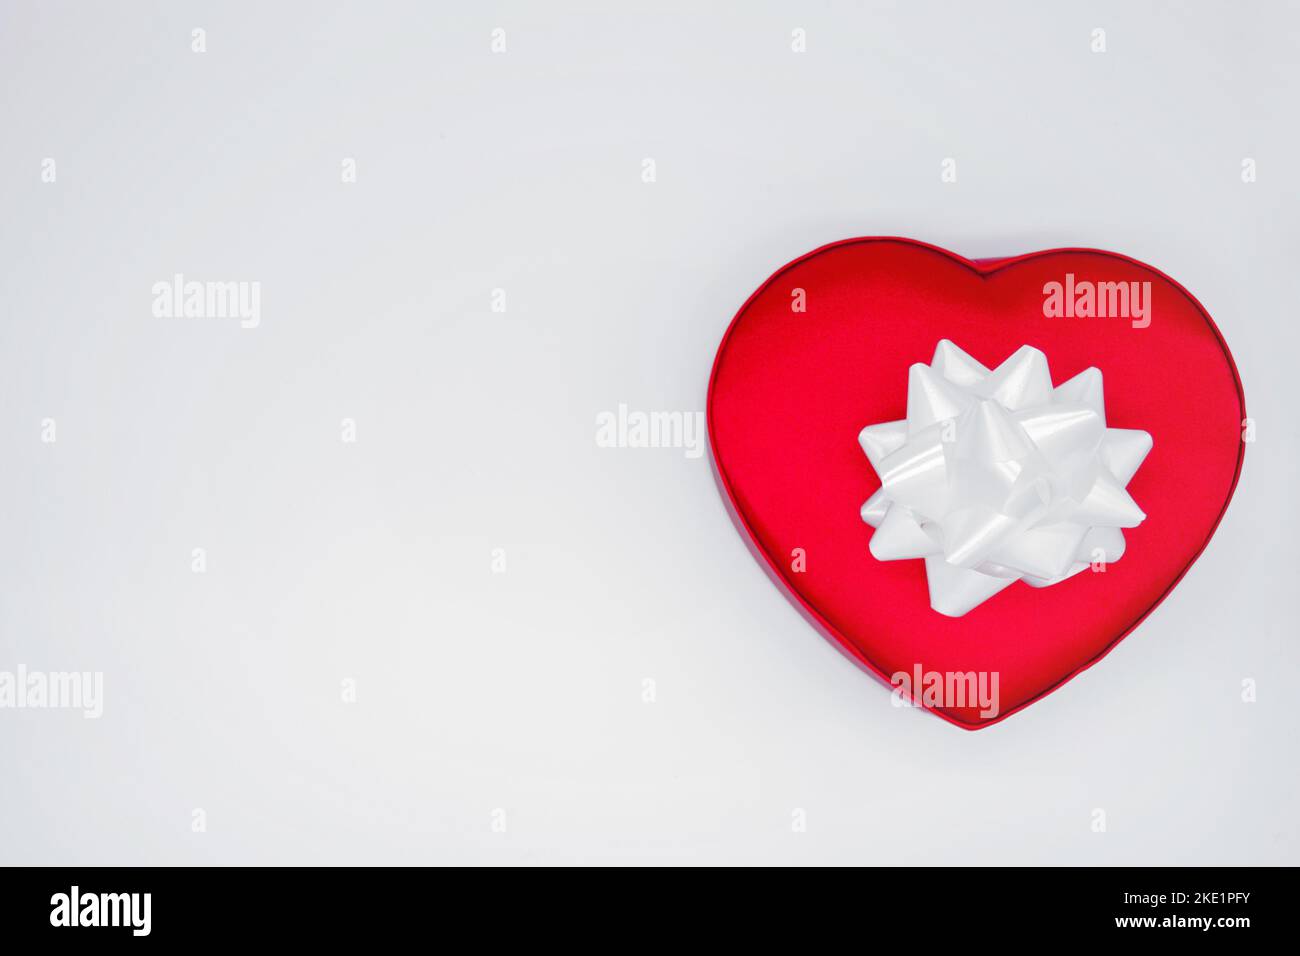 Red satin box in shape of a heart, tied with a with large white flower bow on a white background. Concept of love, Valentine's day, gift, surprise. Stock Photo